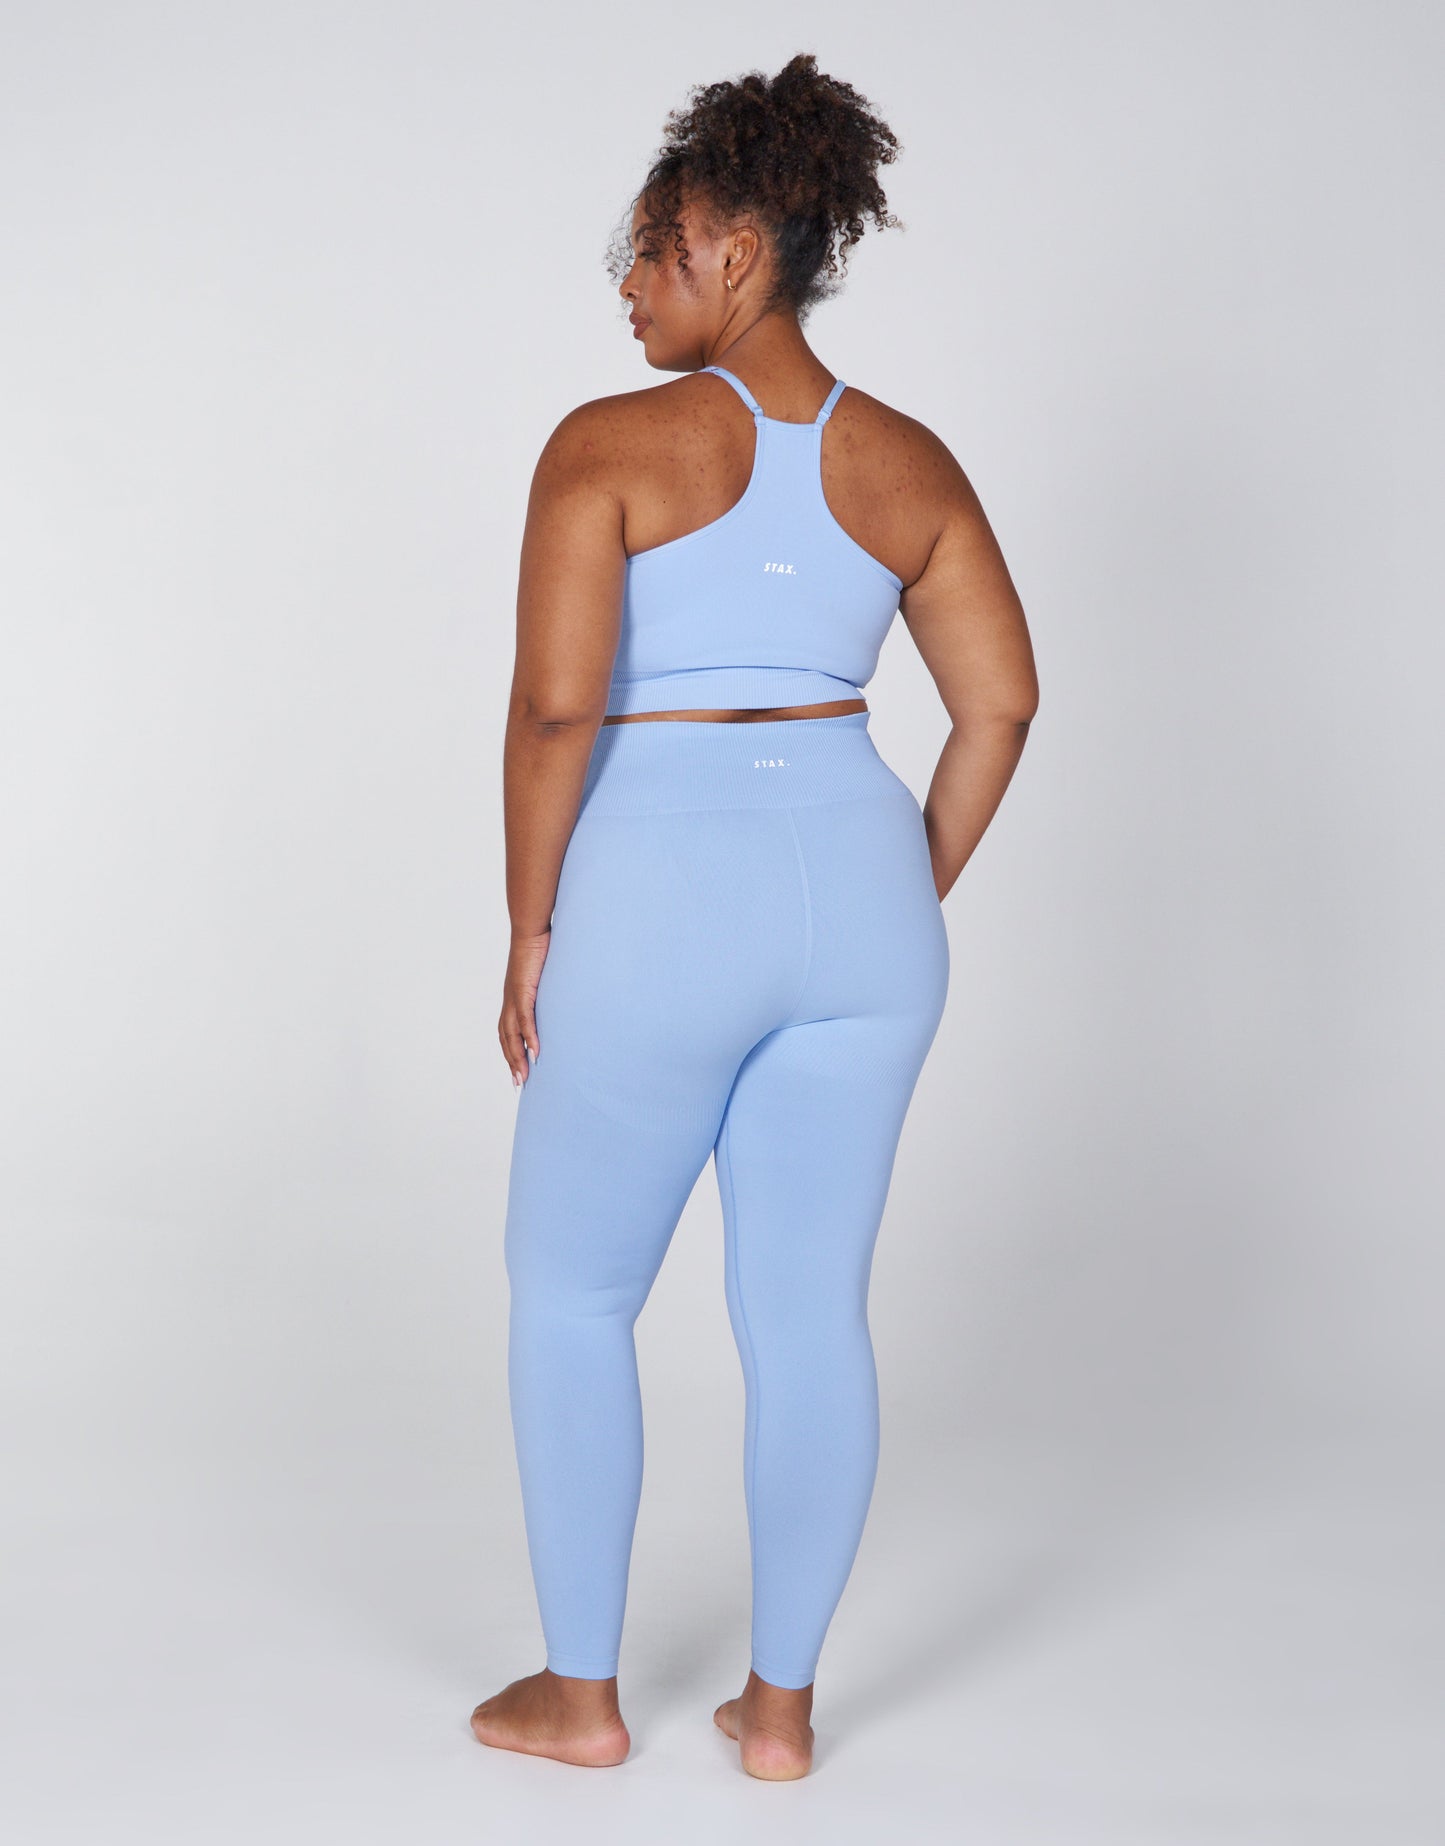 STAX. PSF Strappy Crop - Baby blue